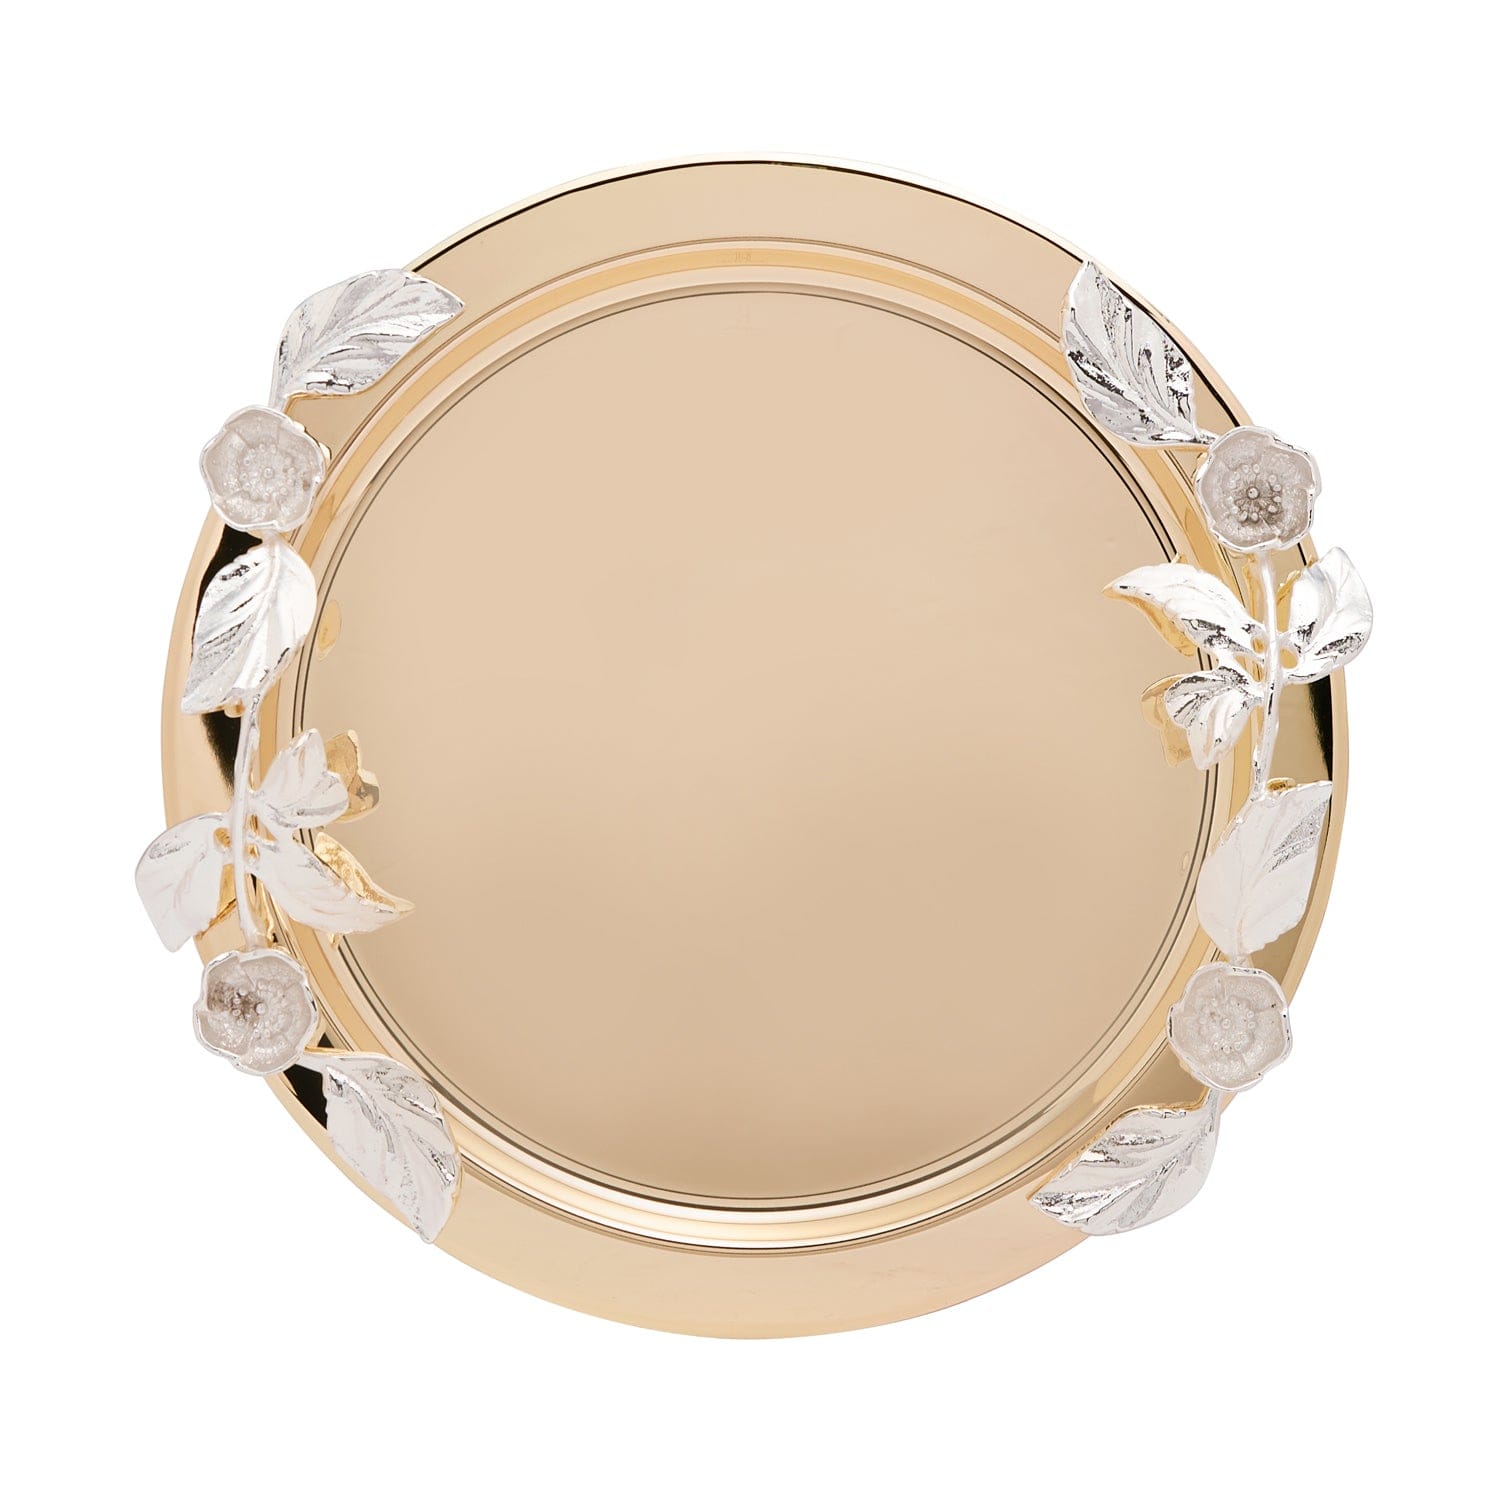 Pantazelos 4 Seasons Of Blossoms Goldplated and Silverplated Round Tray - 3080/GPSP